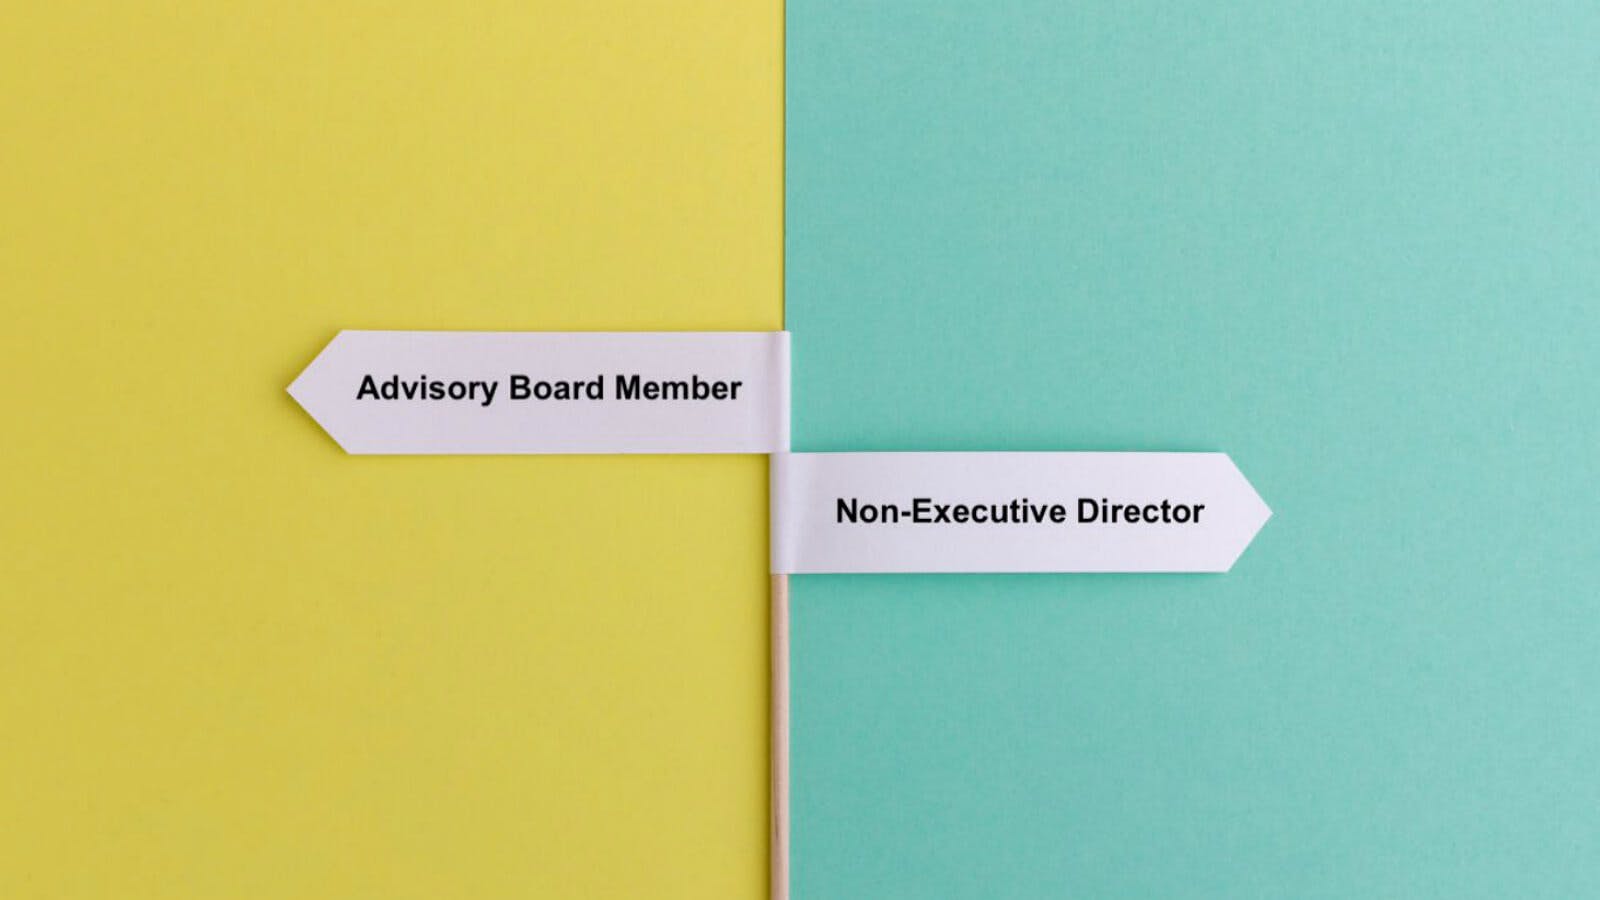 Sign for advisory board member and NED